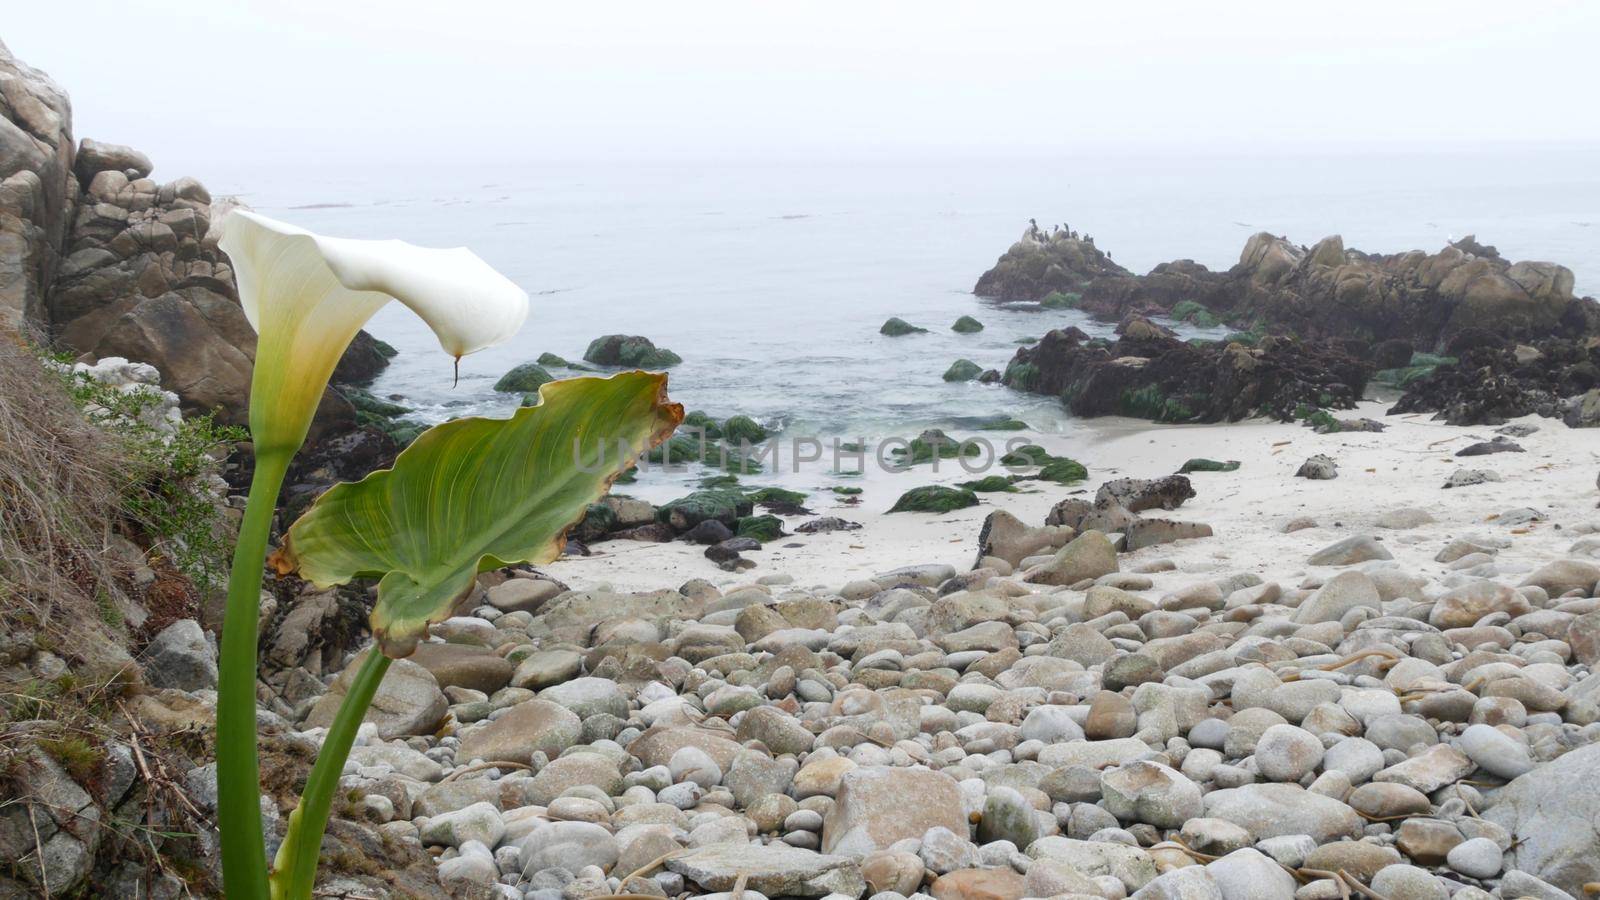 Calla lily white flower on rocky craggy shore, pebble beach, Monterey bay nature, California coast, USA. Foggy misty weather and calm sea ocean water waves. Cormorant birds flock and cala lilly bloom.